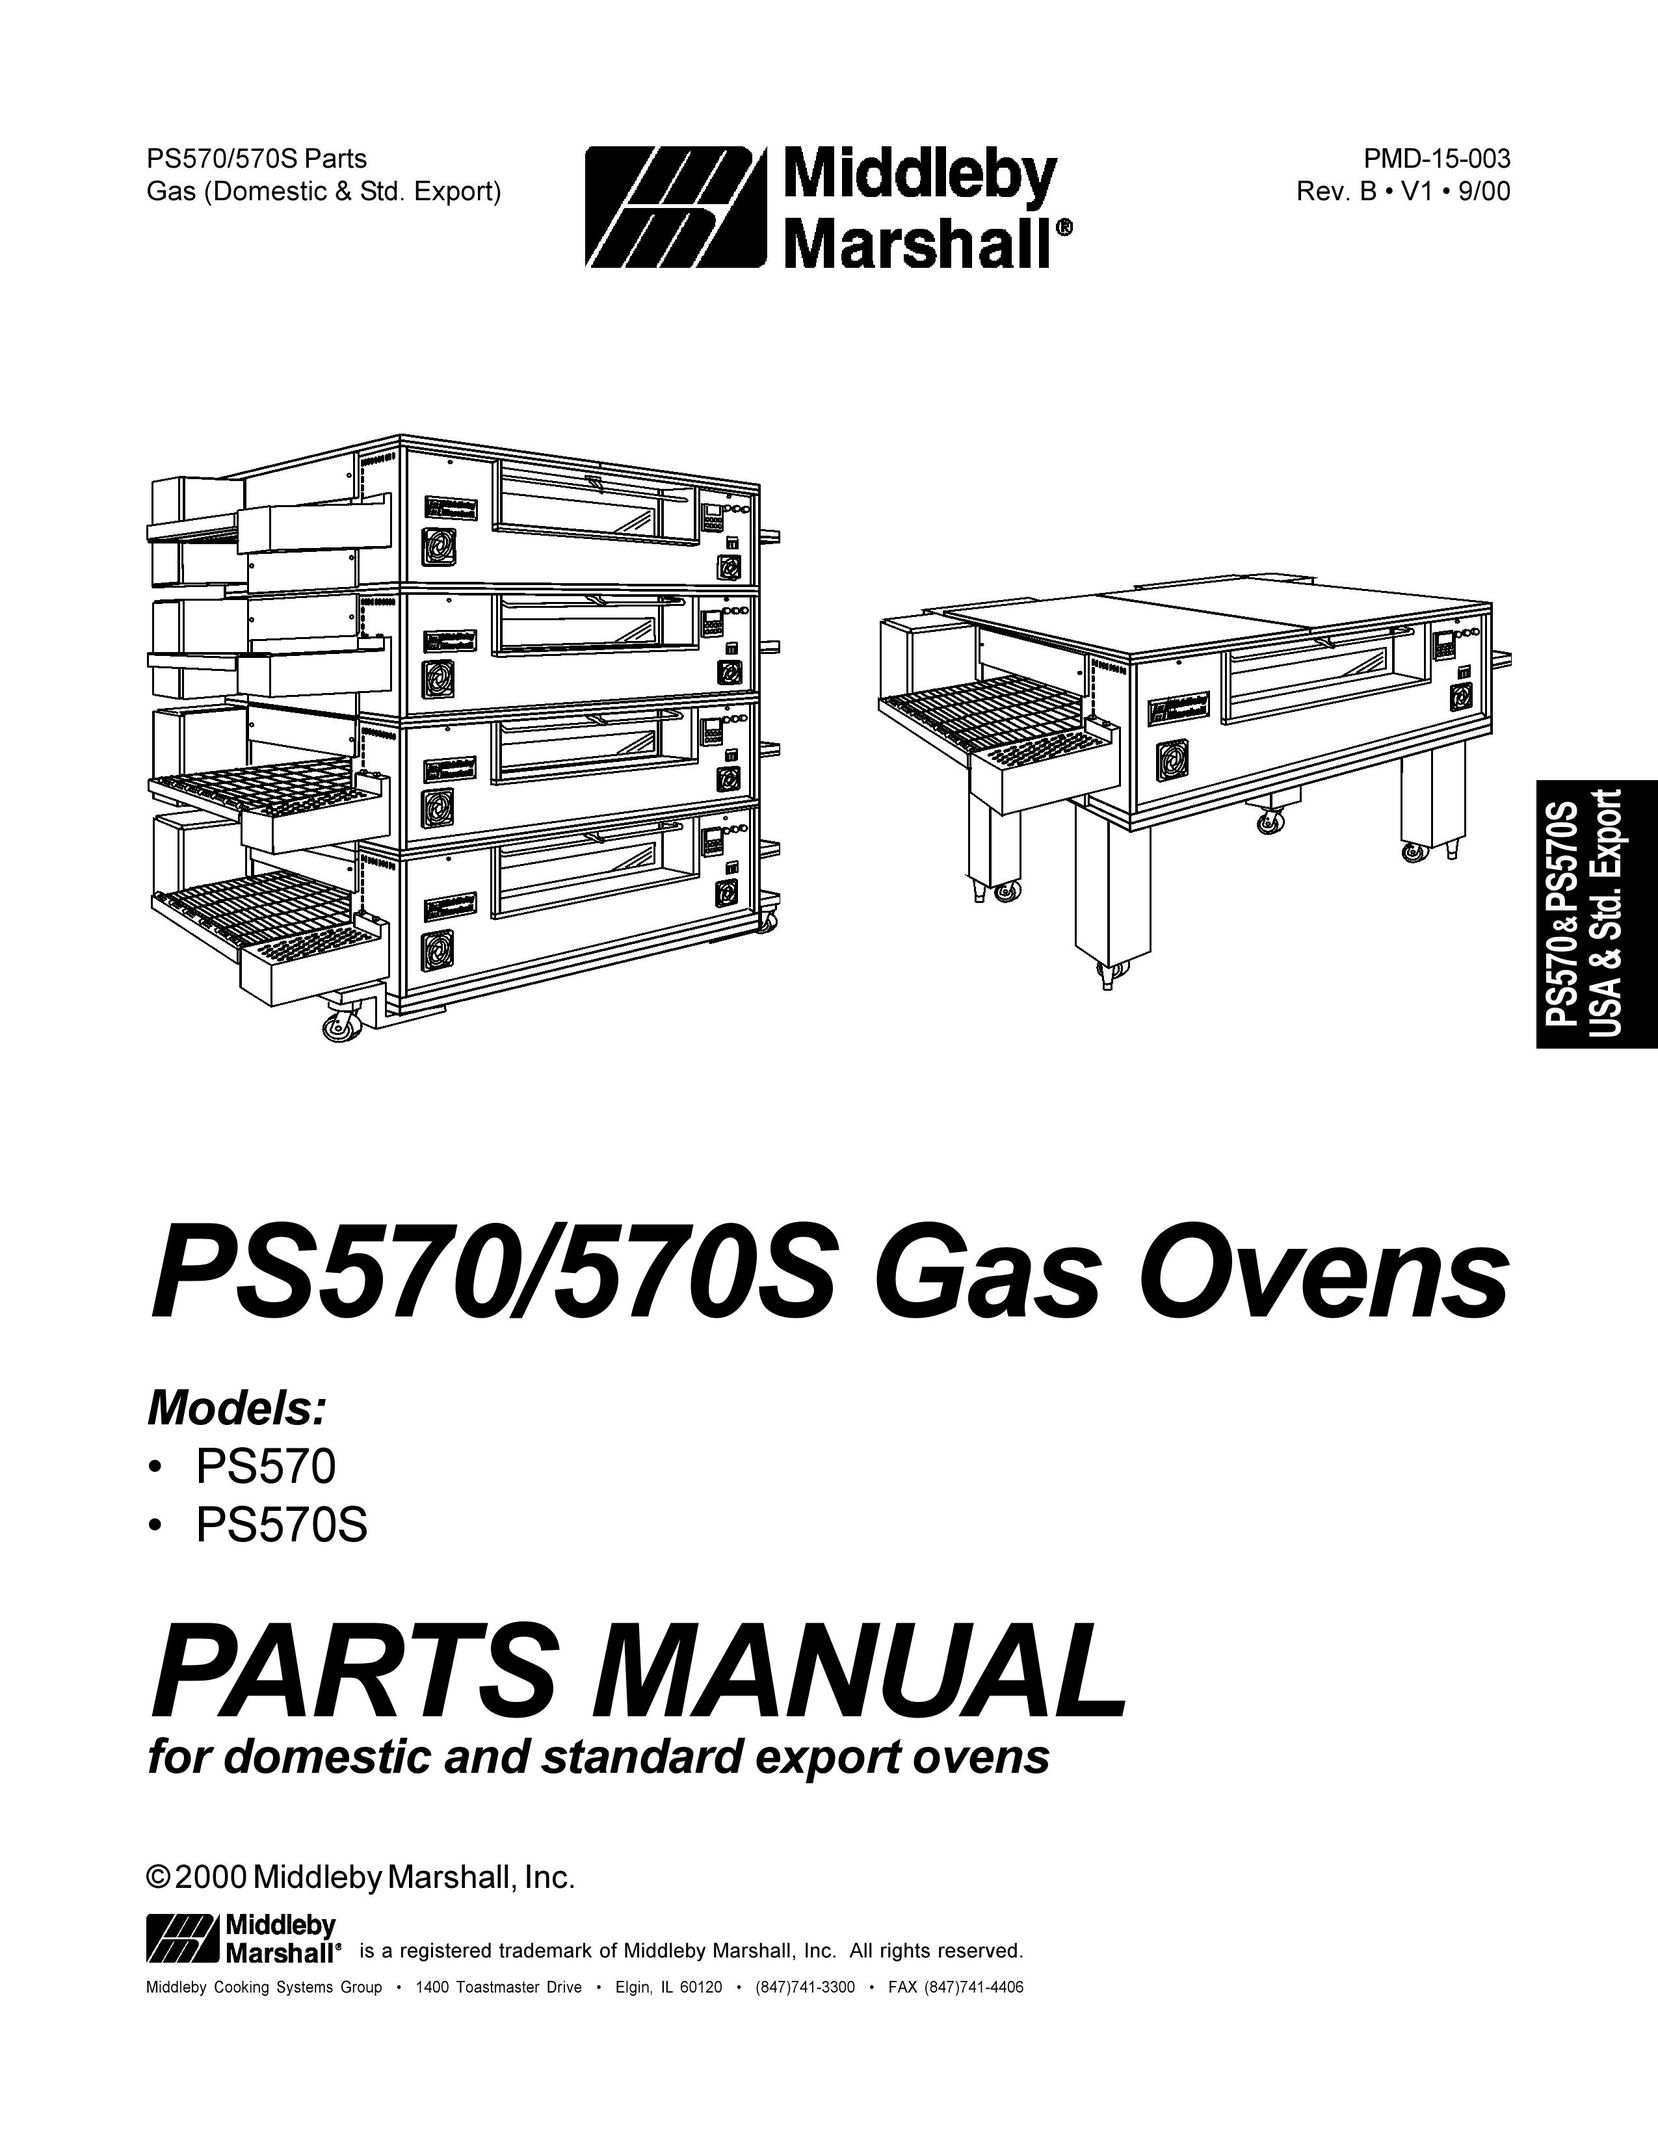 Middleby Marshall PS570 Oven User Manual